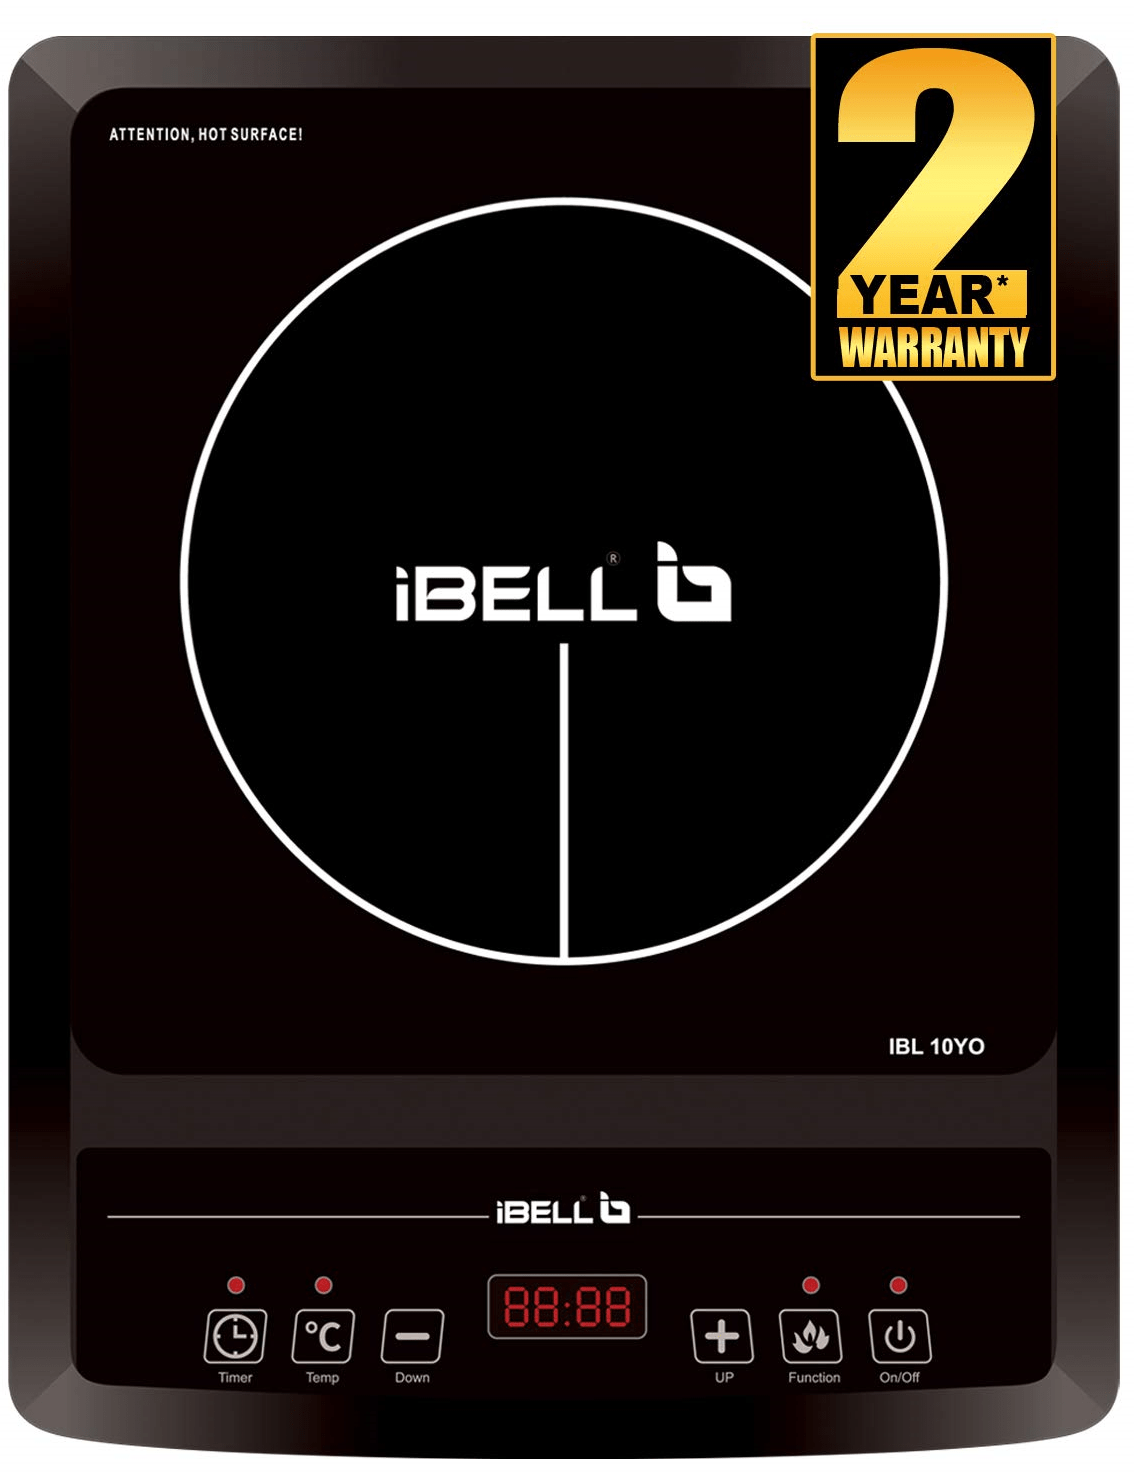 iBELL Hold The World. Digitally! 2000 W Induction Cooktop with Auto Shut Off and Overheat Protection